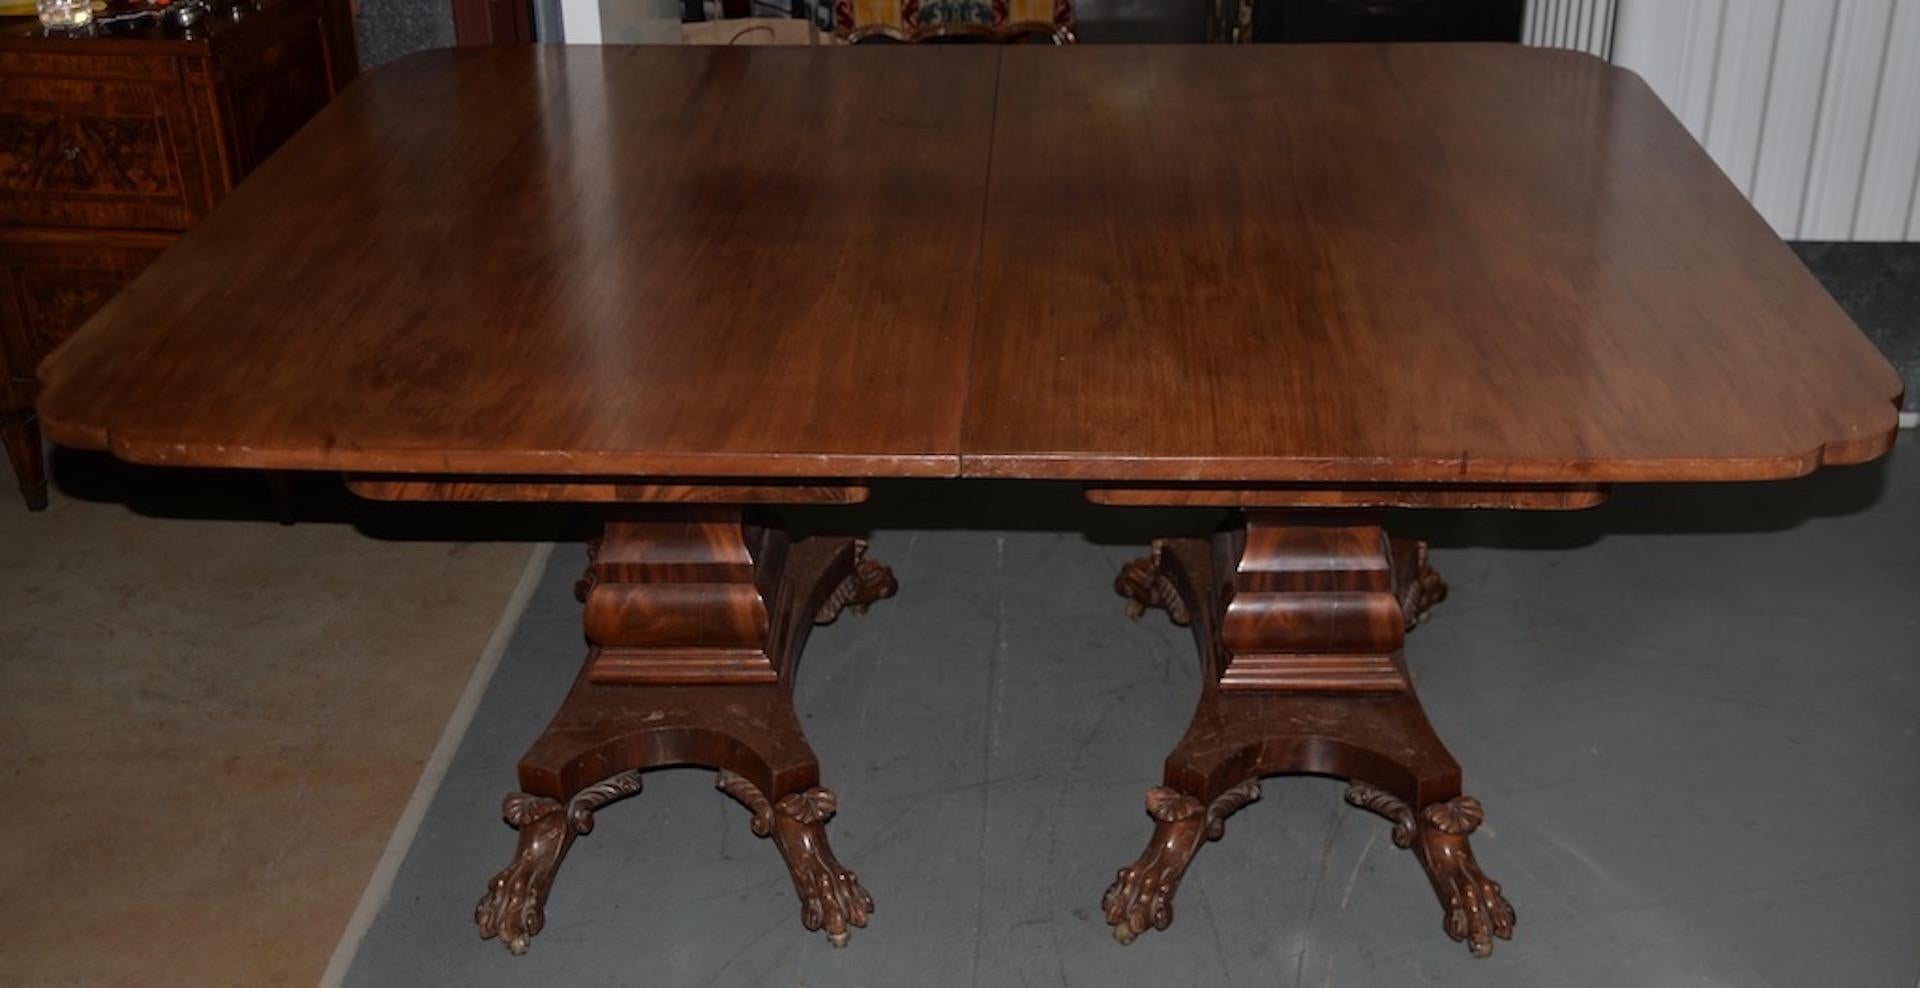 William IV mahogany dining table with lions paw feet, 19th century.

Exceptionally well built late 19th century mahogany dining table. 

This table was made at a time when cabinet makers took pride in their work. This table was hand made by talented